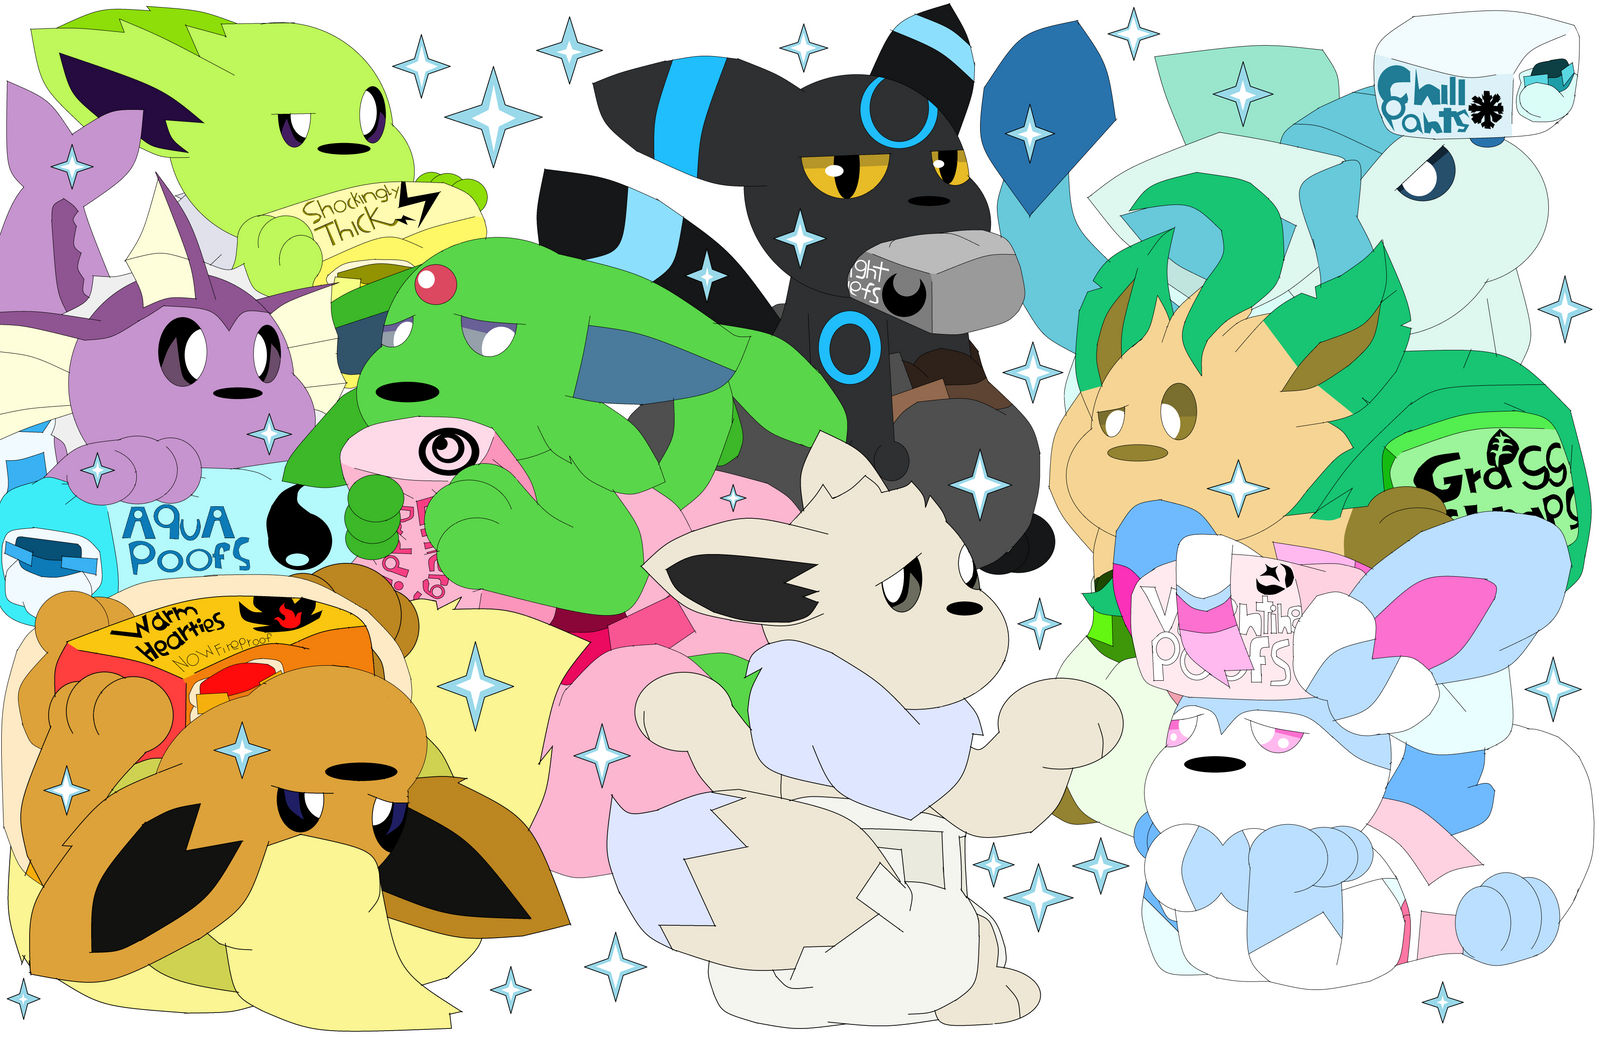 Shiny Eeveelutions Project - Complete by Rotommowtom on DeviantArt